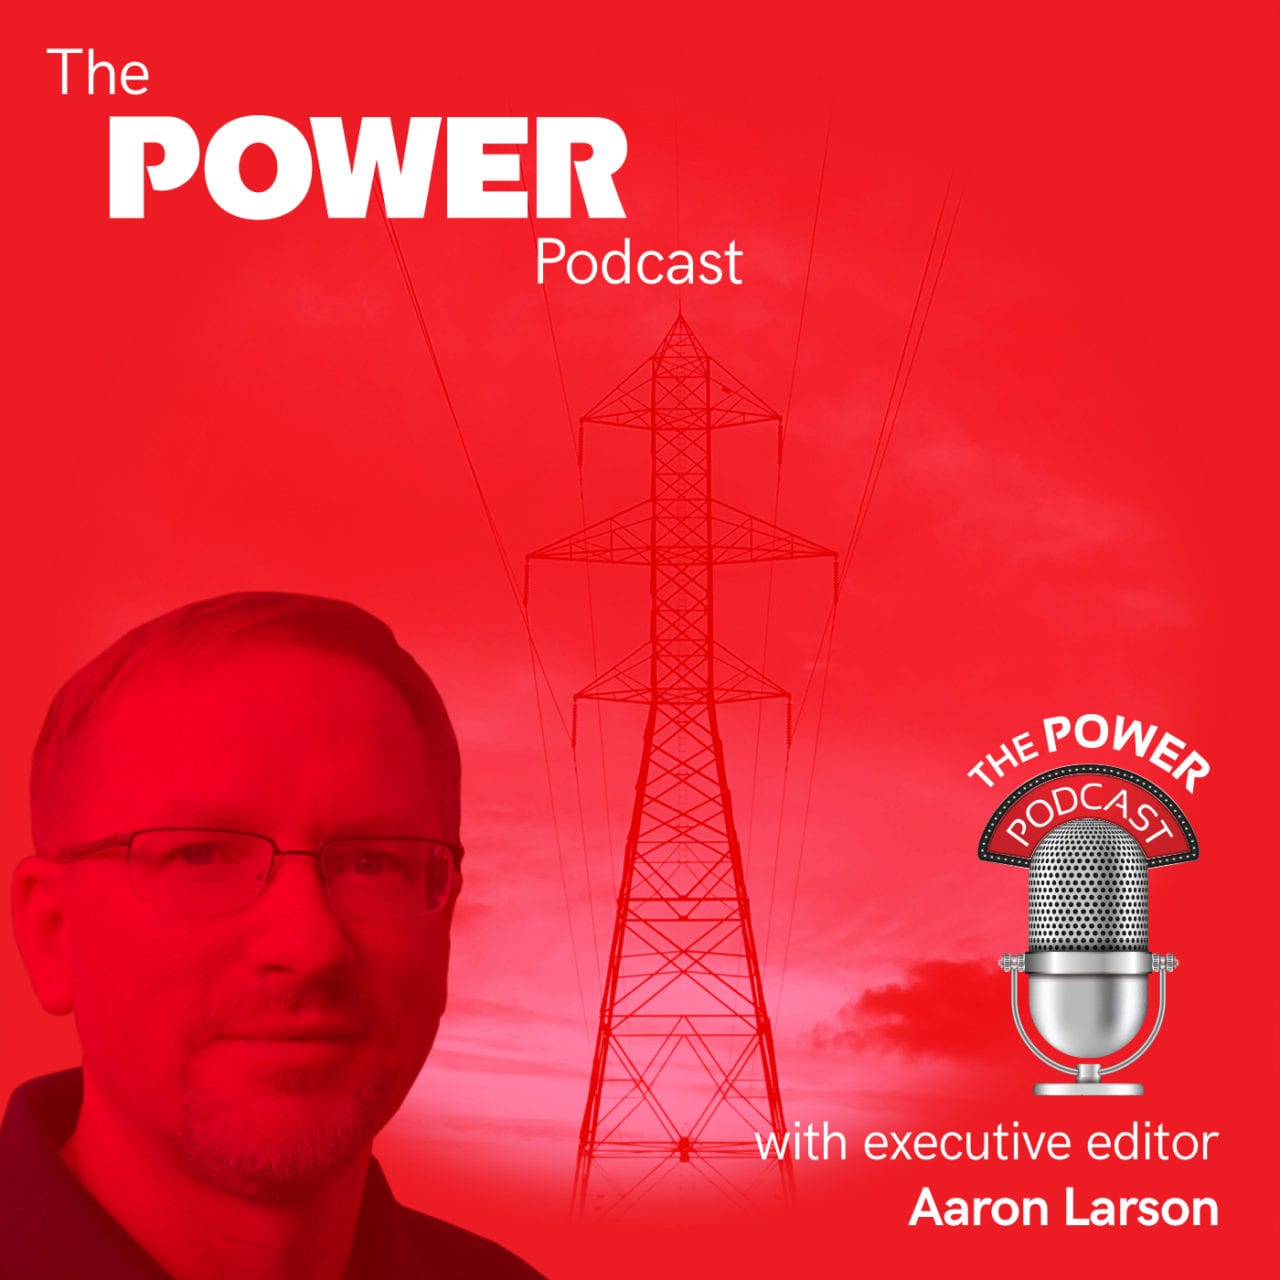 The POWER Podcast Archive Vol. 2